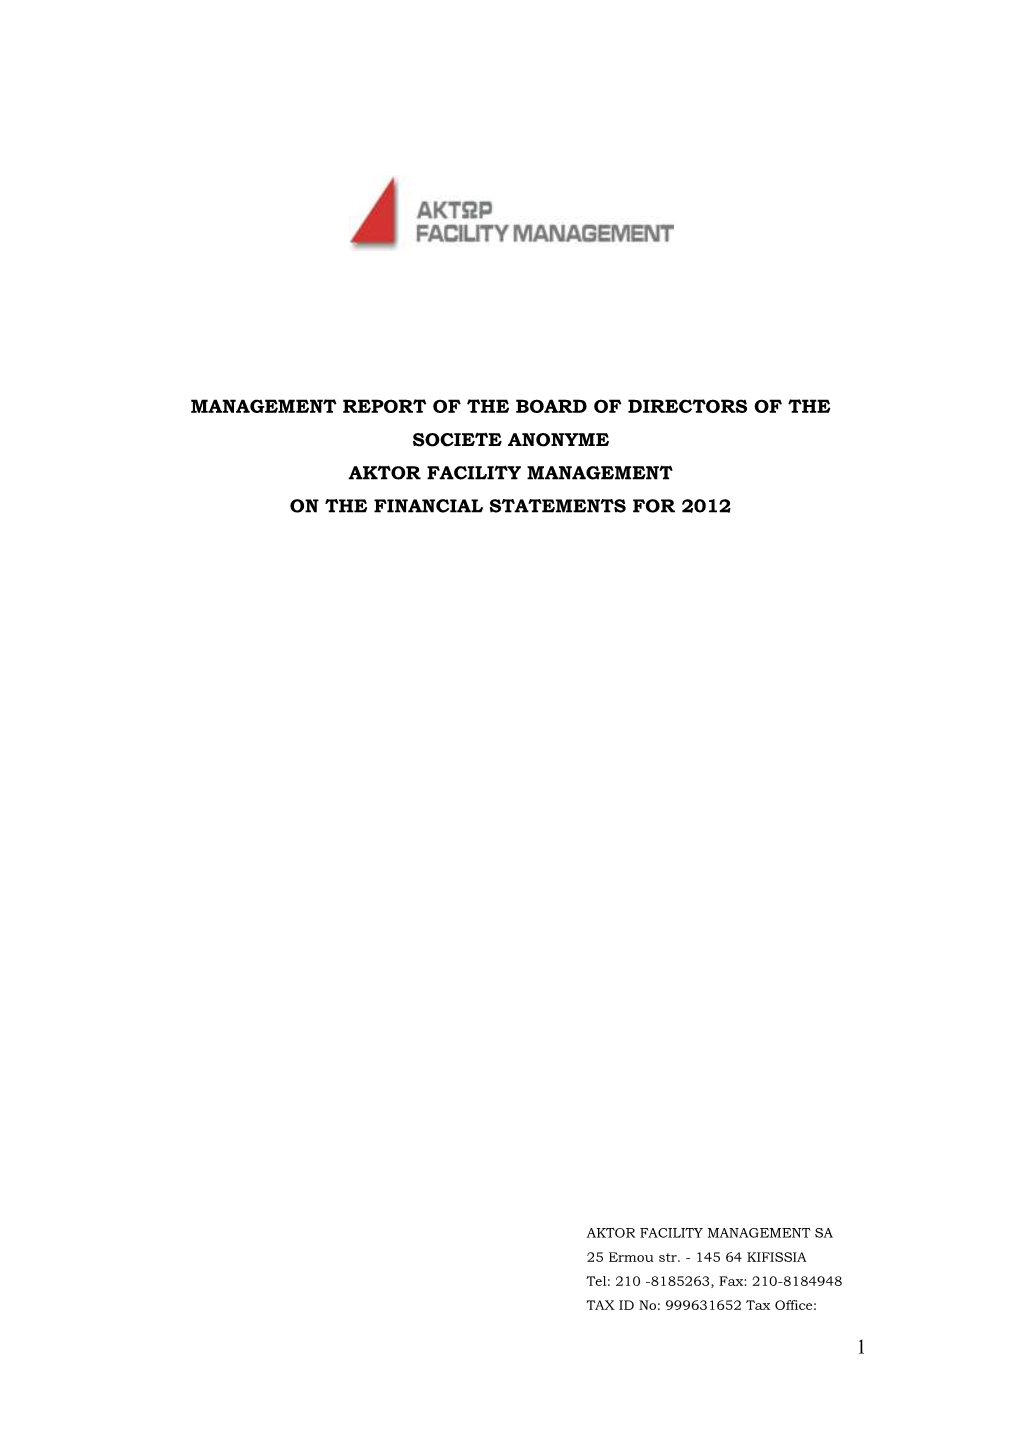 Management Report of the Board of Directors of the Societe Anonyme Aktor Facility Management on the Financial Statements for 2012